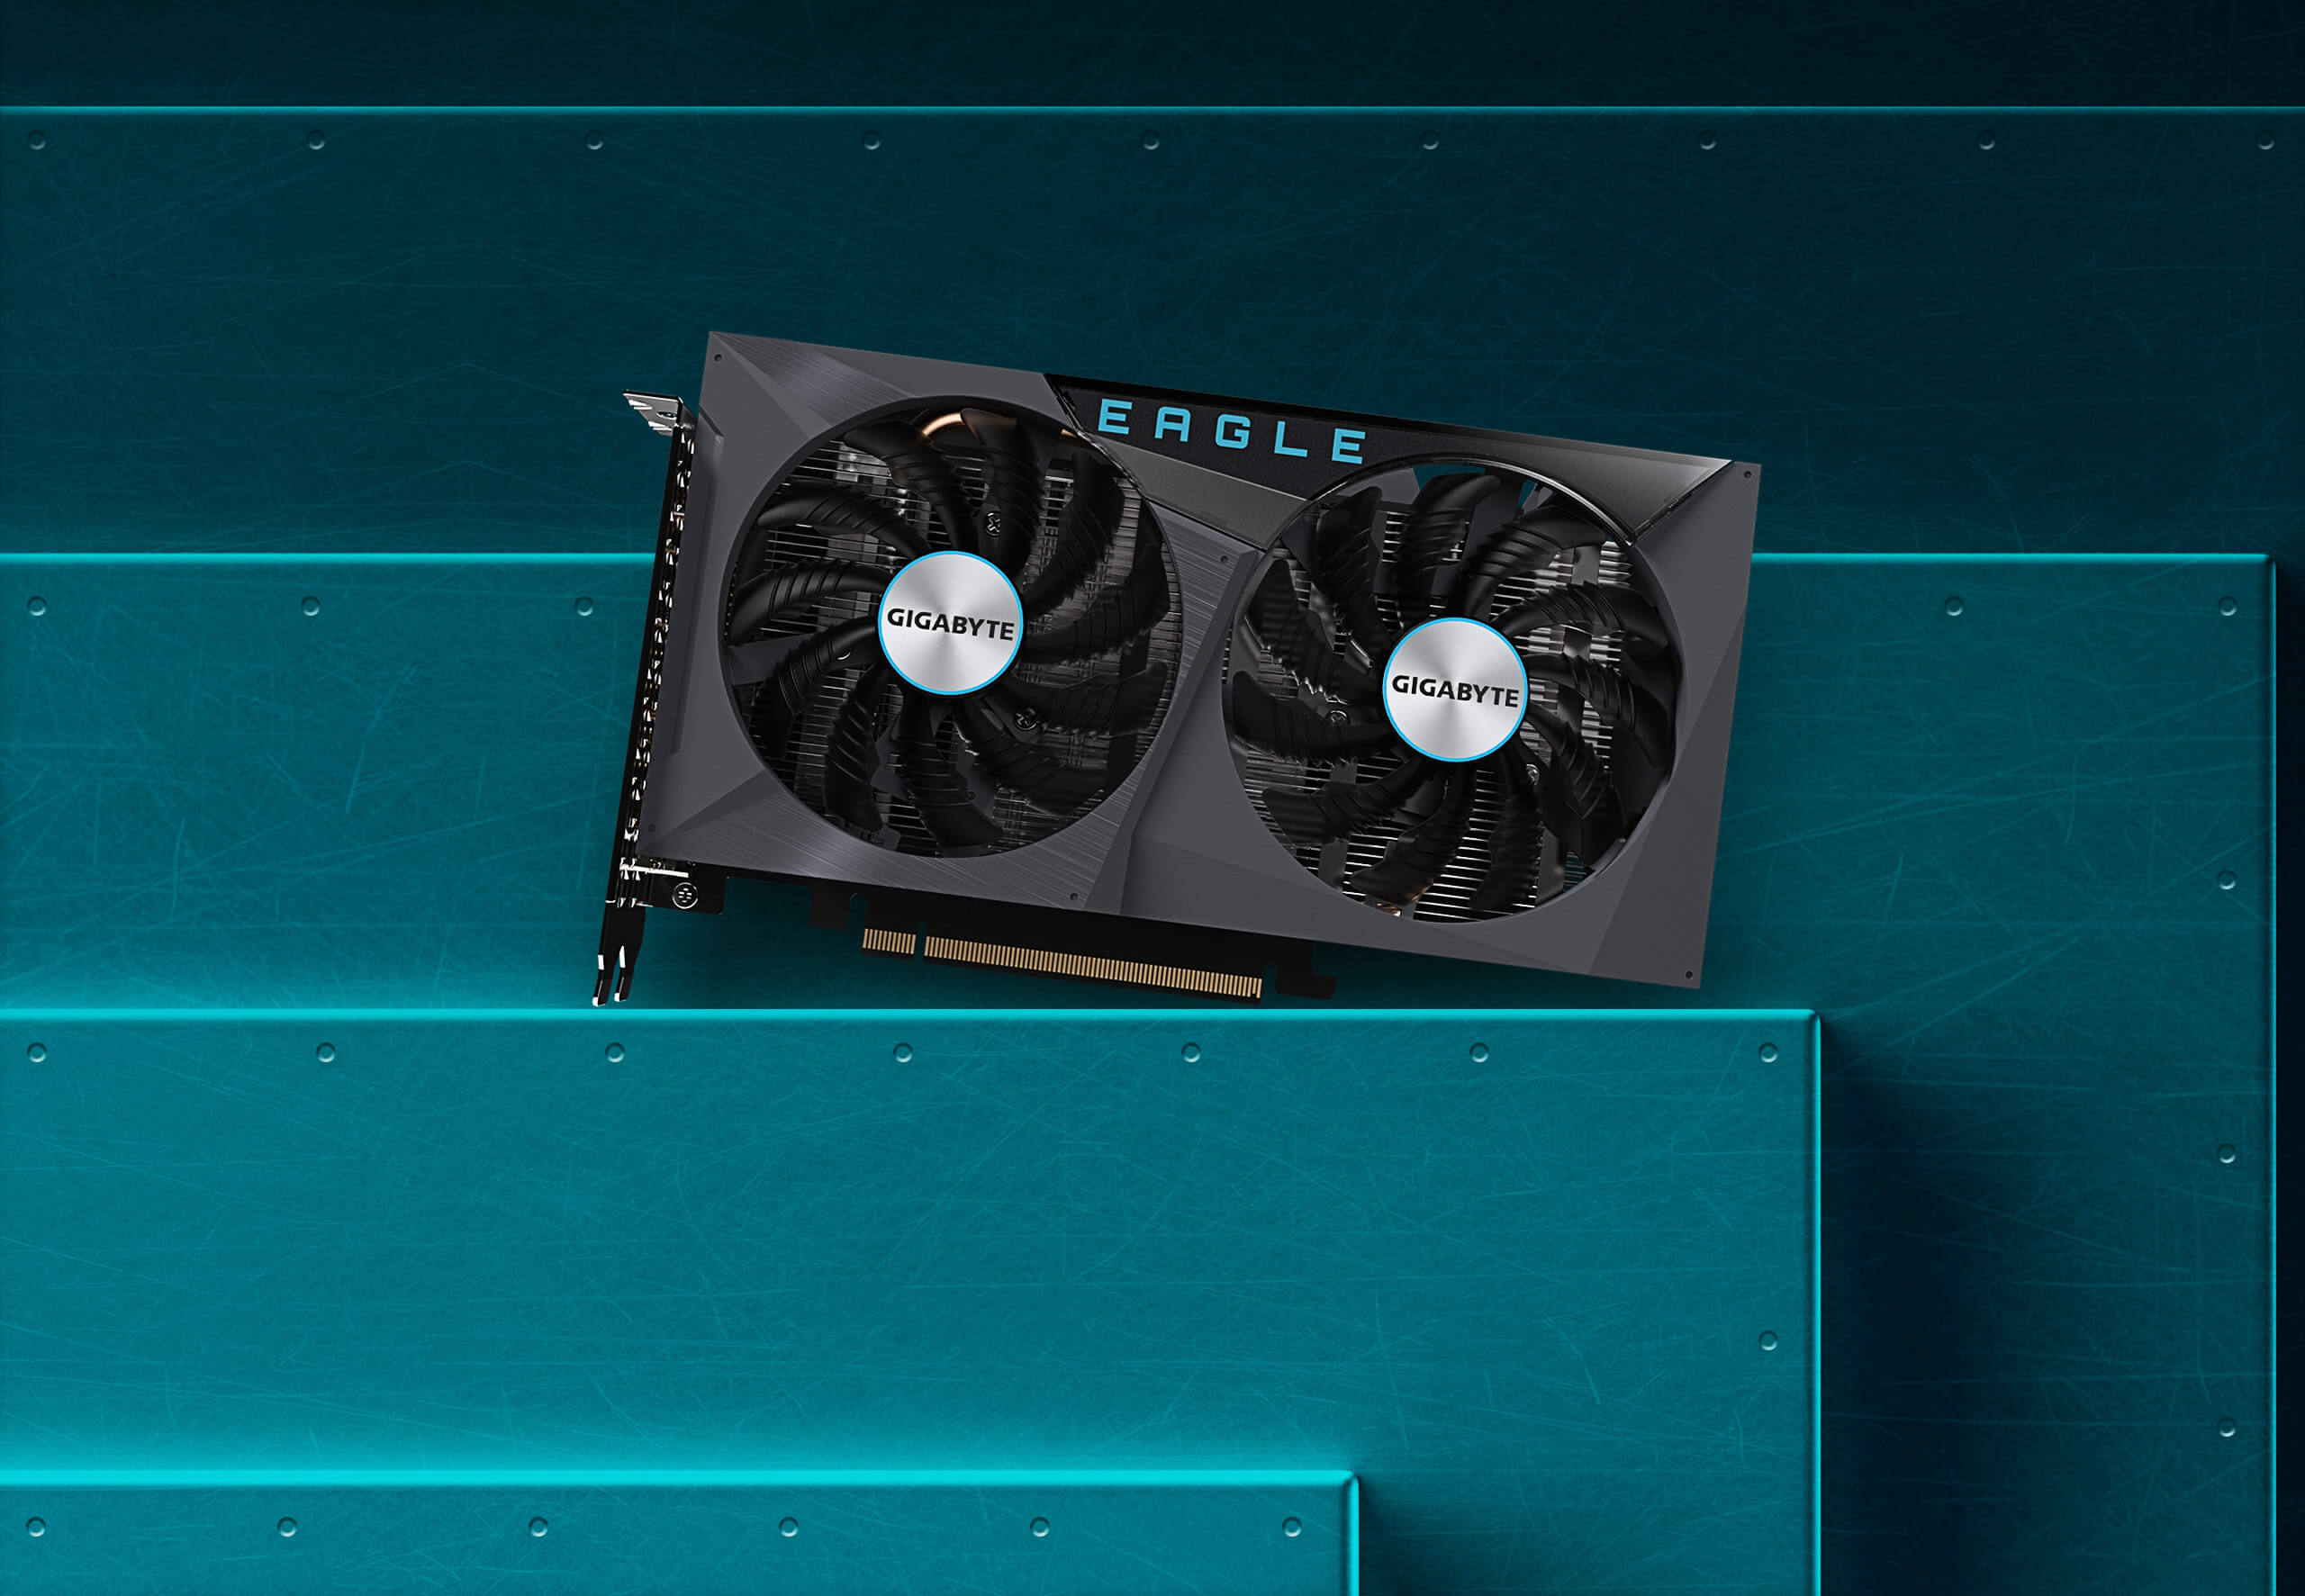 GeForce RTX™ 3050 EAGLE OC 8G Key Features | Graphics Card